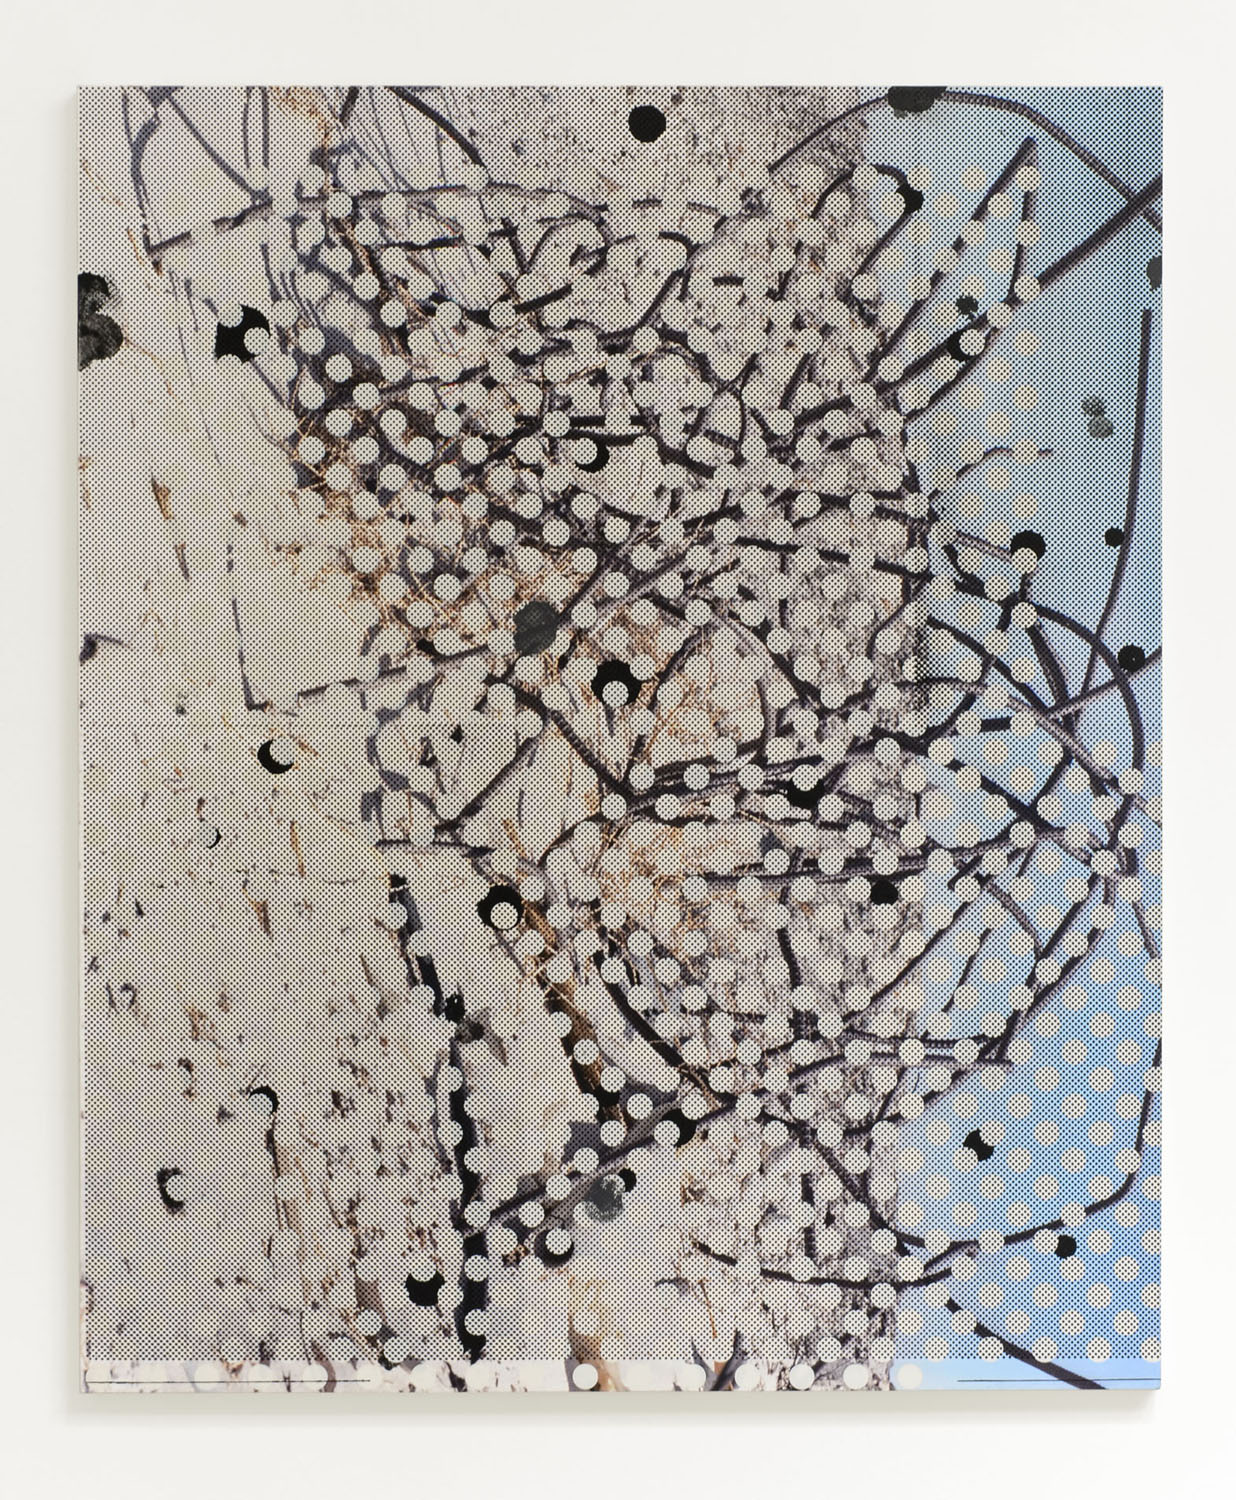  Untitled (rebar 4), 2013  Acrylic, oil and UV cured ink on canvas over panel  65 x 54 inches  165.1 x 137.16 cm       